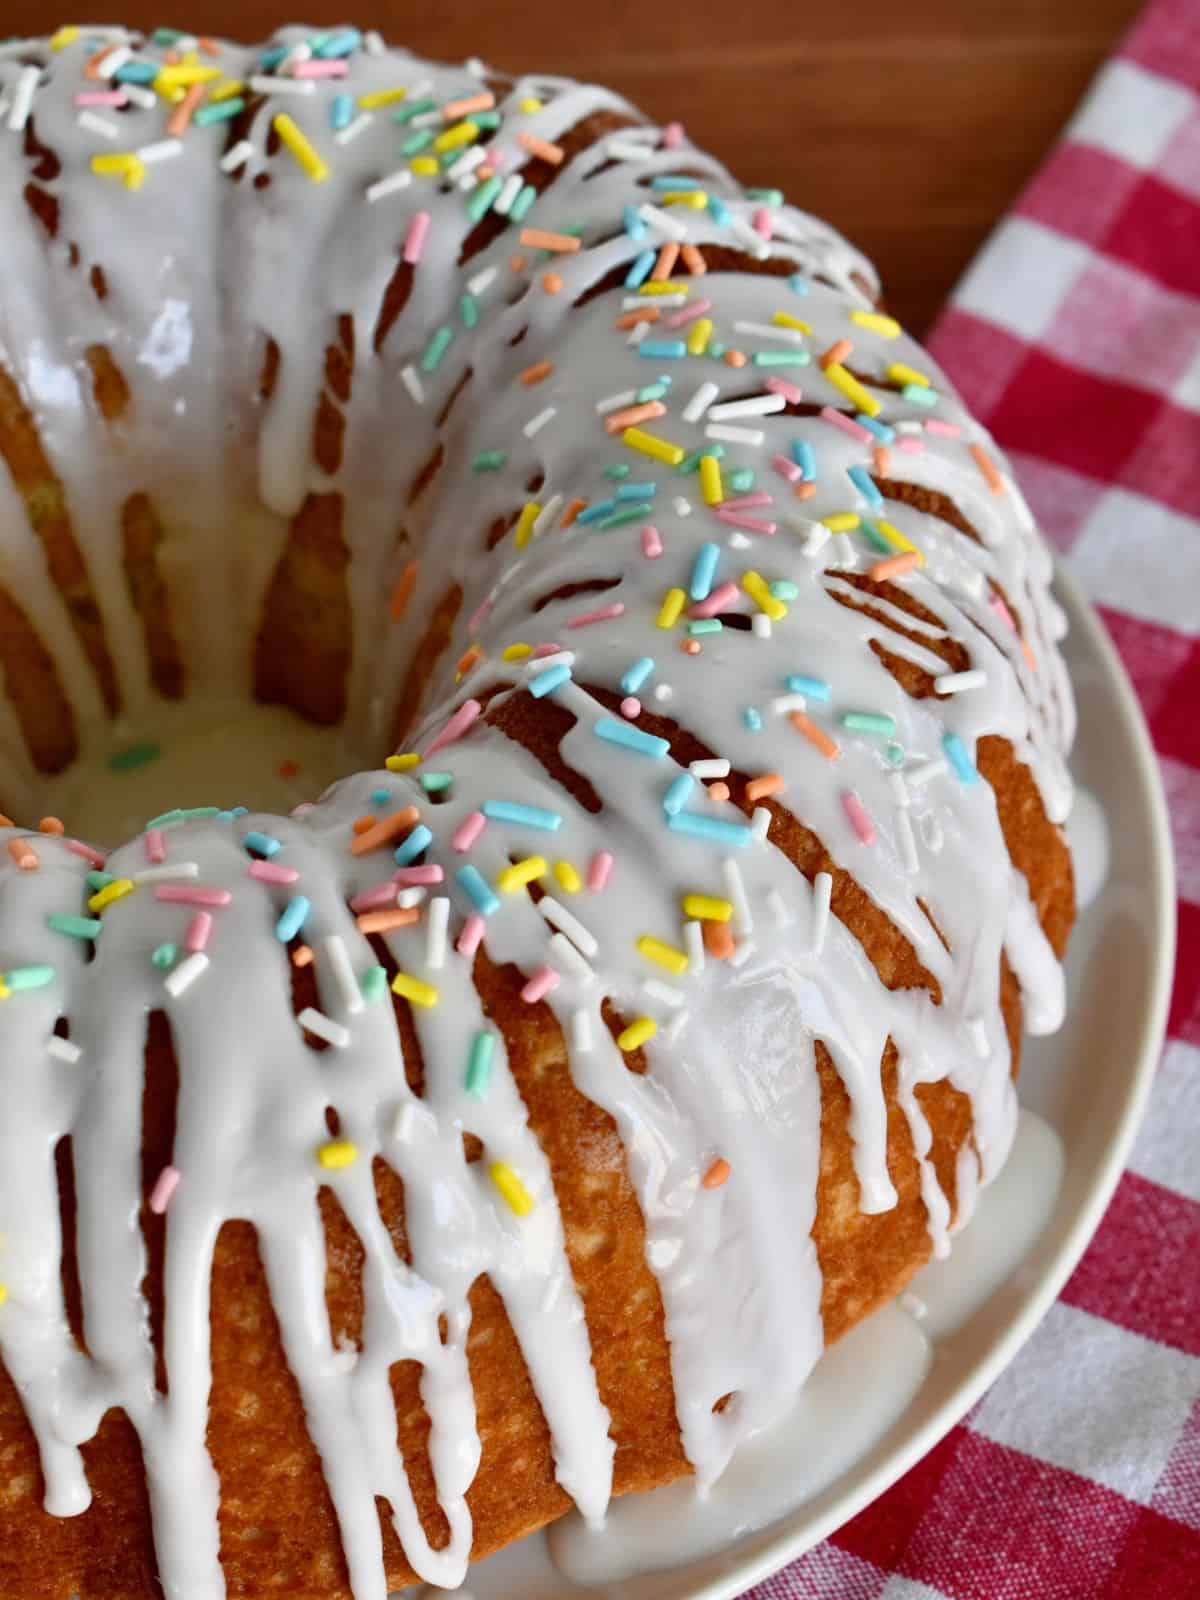 Italian Easter Cake with glaze and pastel sprinkles on a white plate with a checkered napkin underneath.